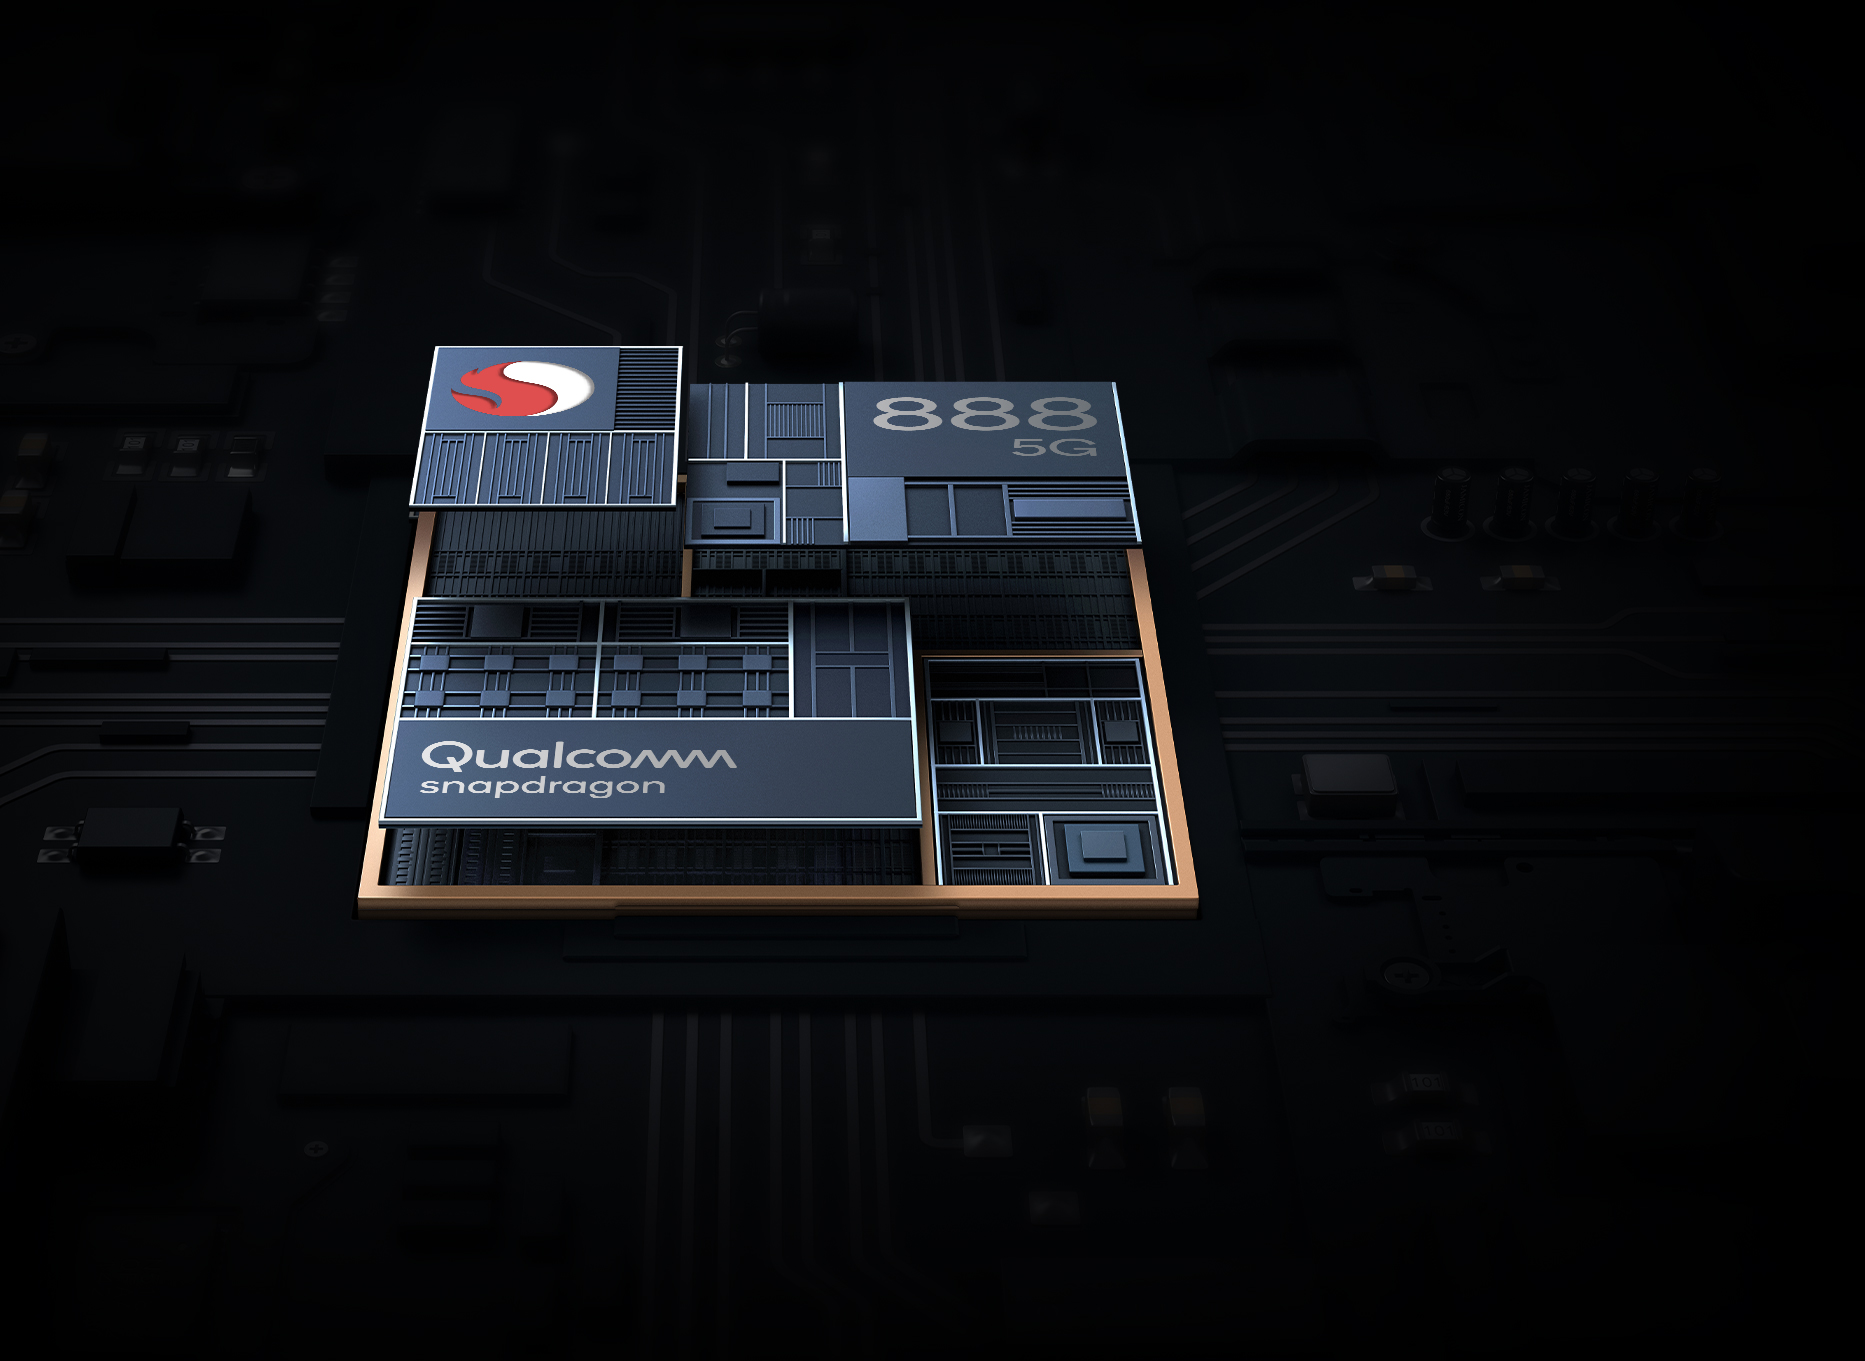 Xiaomi 11T Pro shares the same powerful Snapdragon 888 processor as some Samsung smartphones.